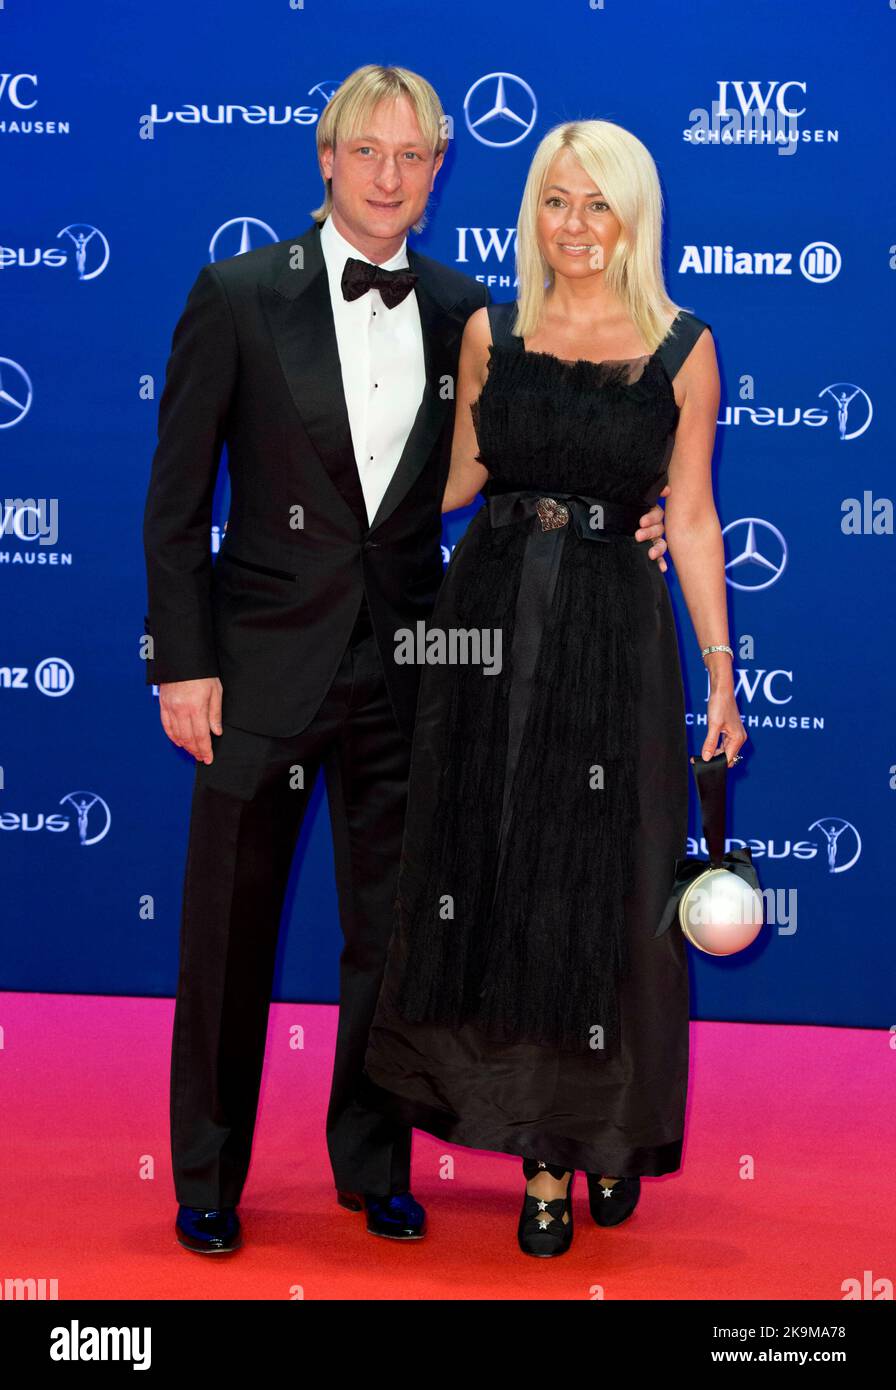 ARCHIVE PHOTO: Evgeni PLUSHENKO turns 40 on November 3, 2022 Evgeni PLUSHENKO (RUS, former figure skater) with his wife Yana RUDKOVSKAYA Guests arrive at the Red Carpet for the Laureus World Sports Awards 2016 in Berlin, Germany on 04/18/2016 . Â Stock Photo